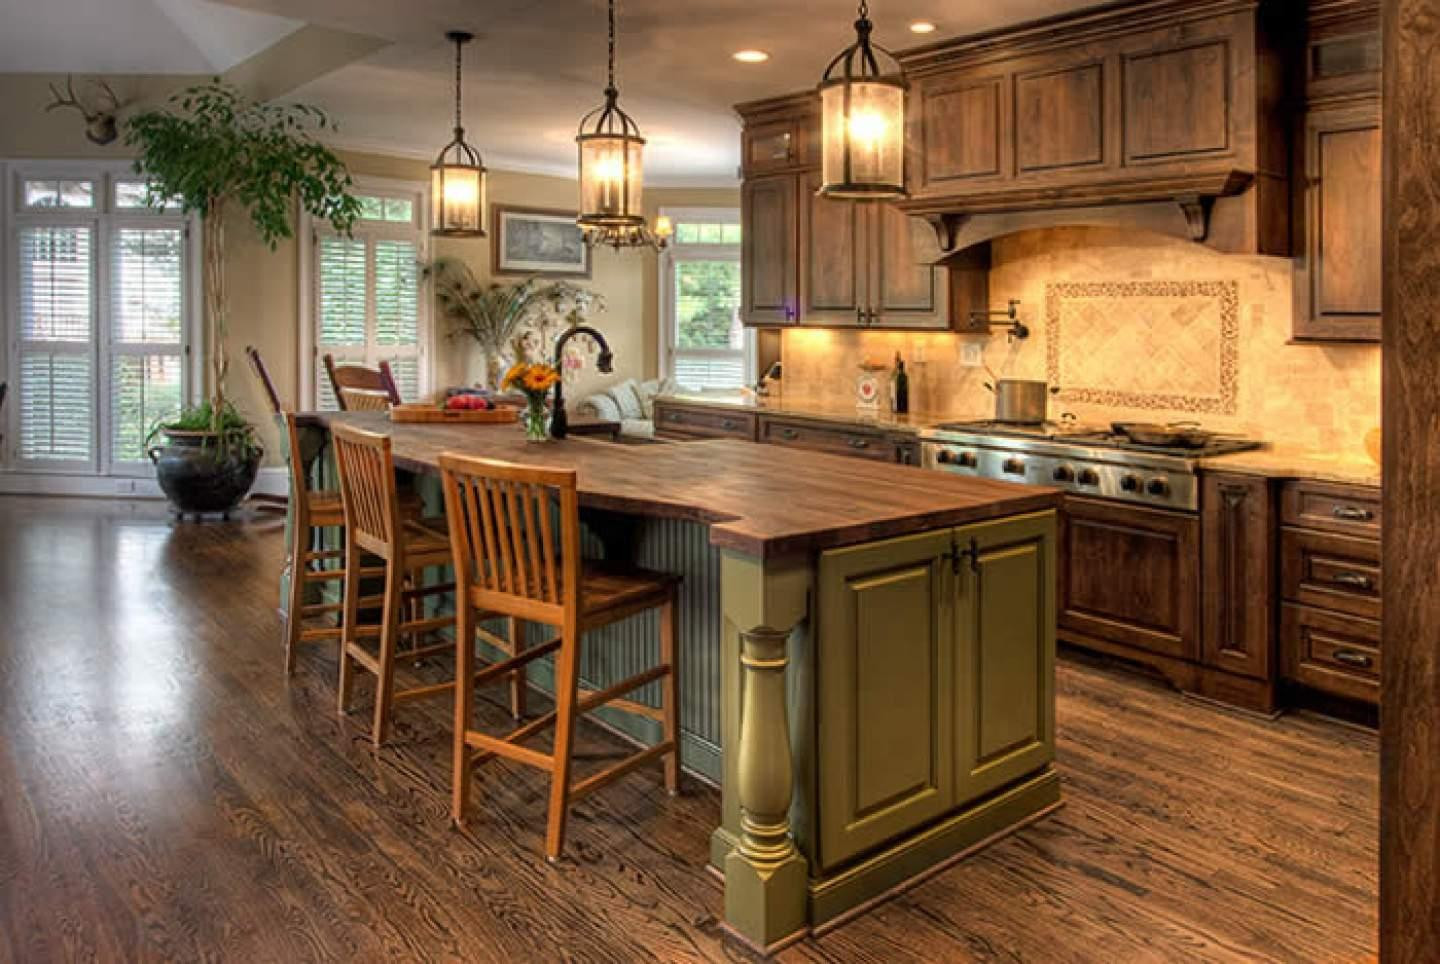 18 Spectacular Mercier Hardwood Flooring Prices 2024 free download mercier hardwood flooring prices of lovely kitchens with hardwood floors and wood cabinets inspiration throughout interior extraordinaryod floors in kitchen problems laminate flooring pros a